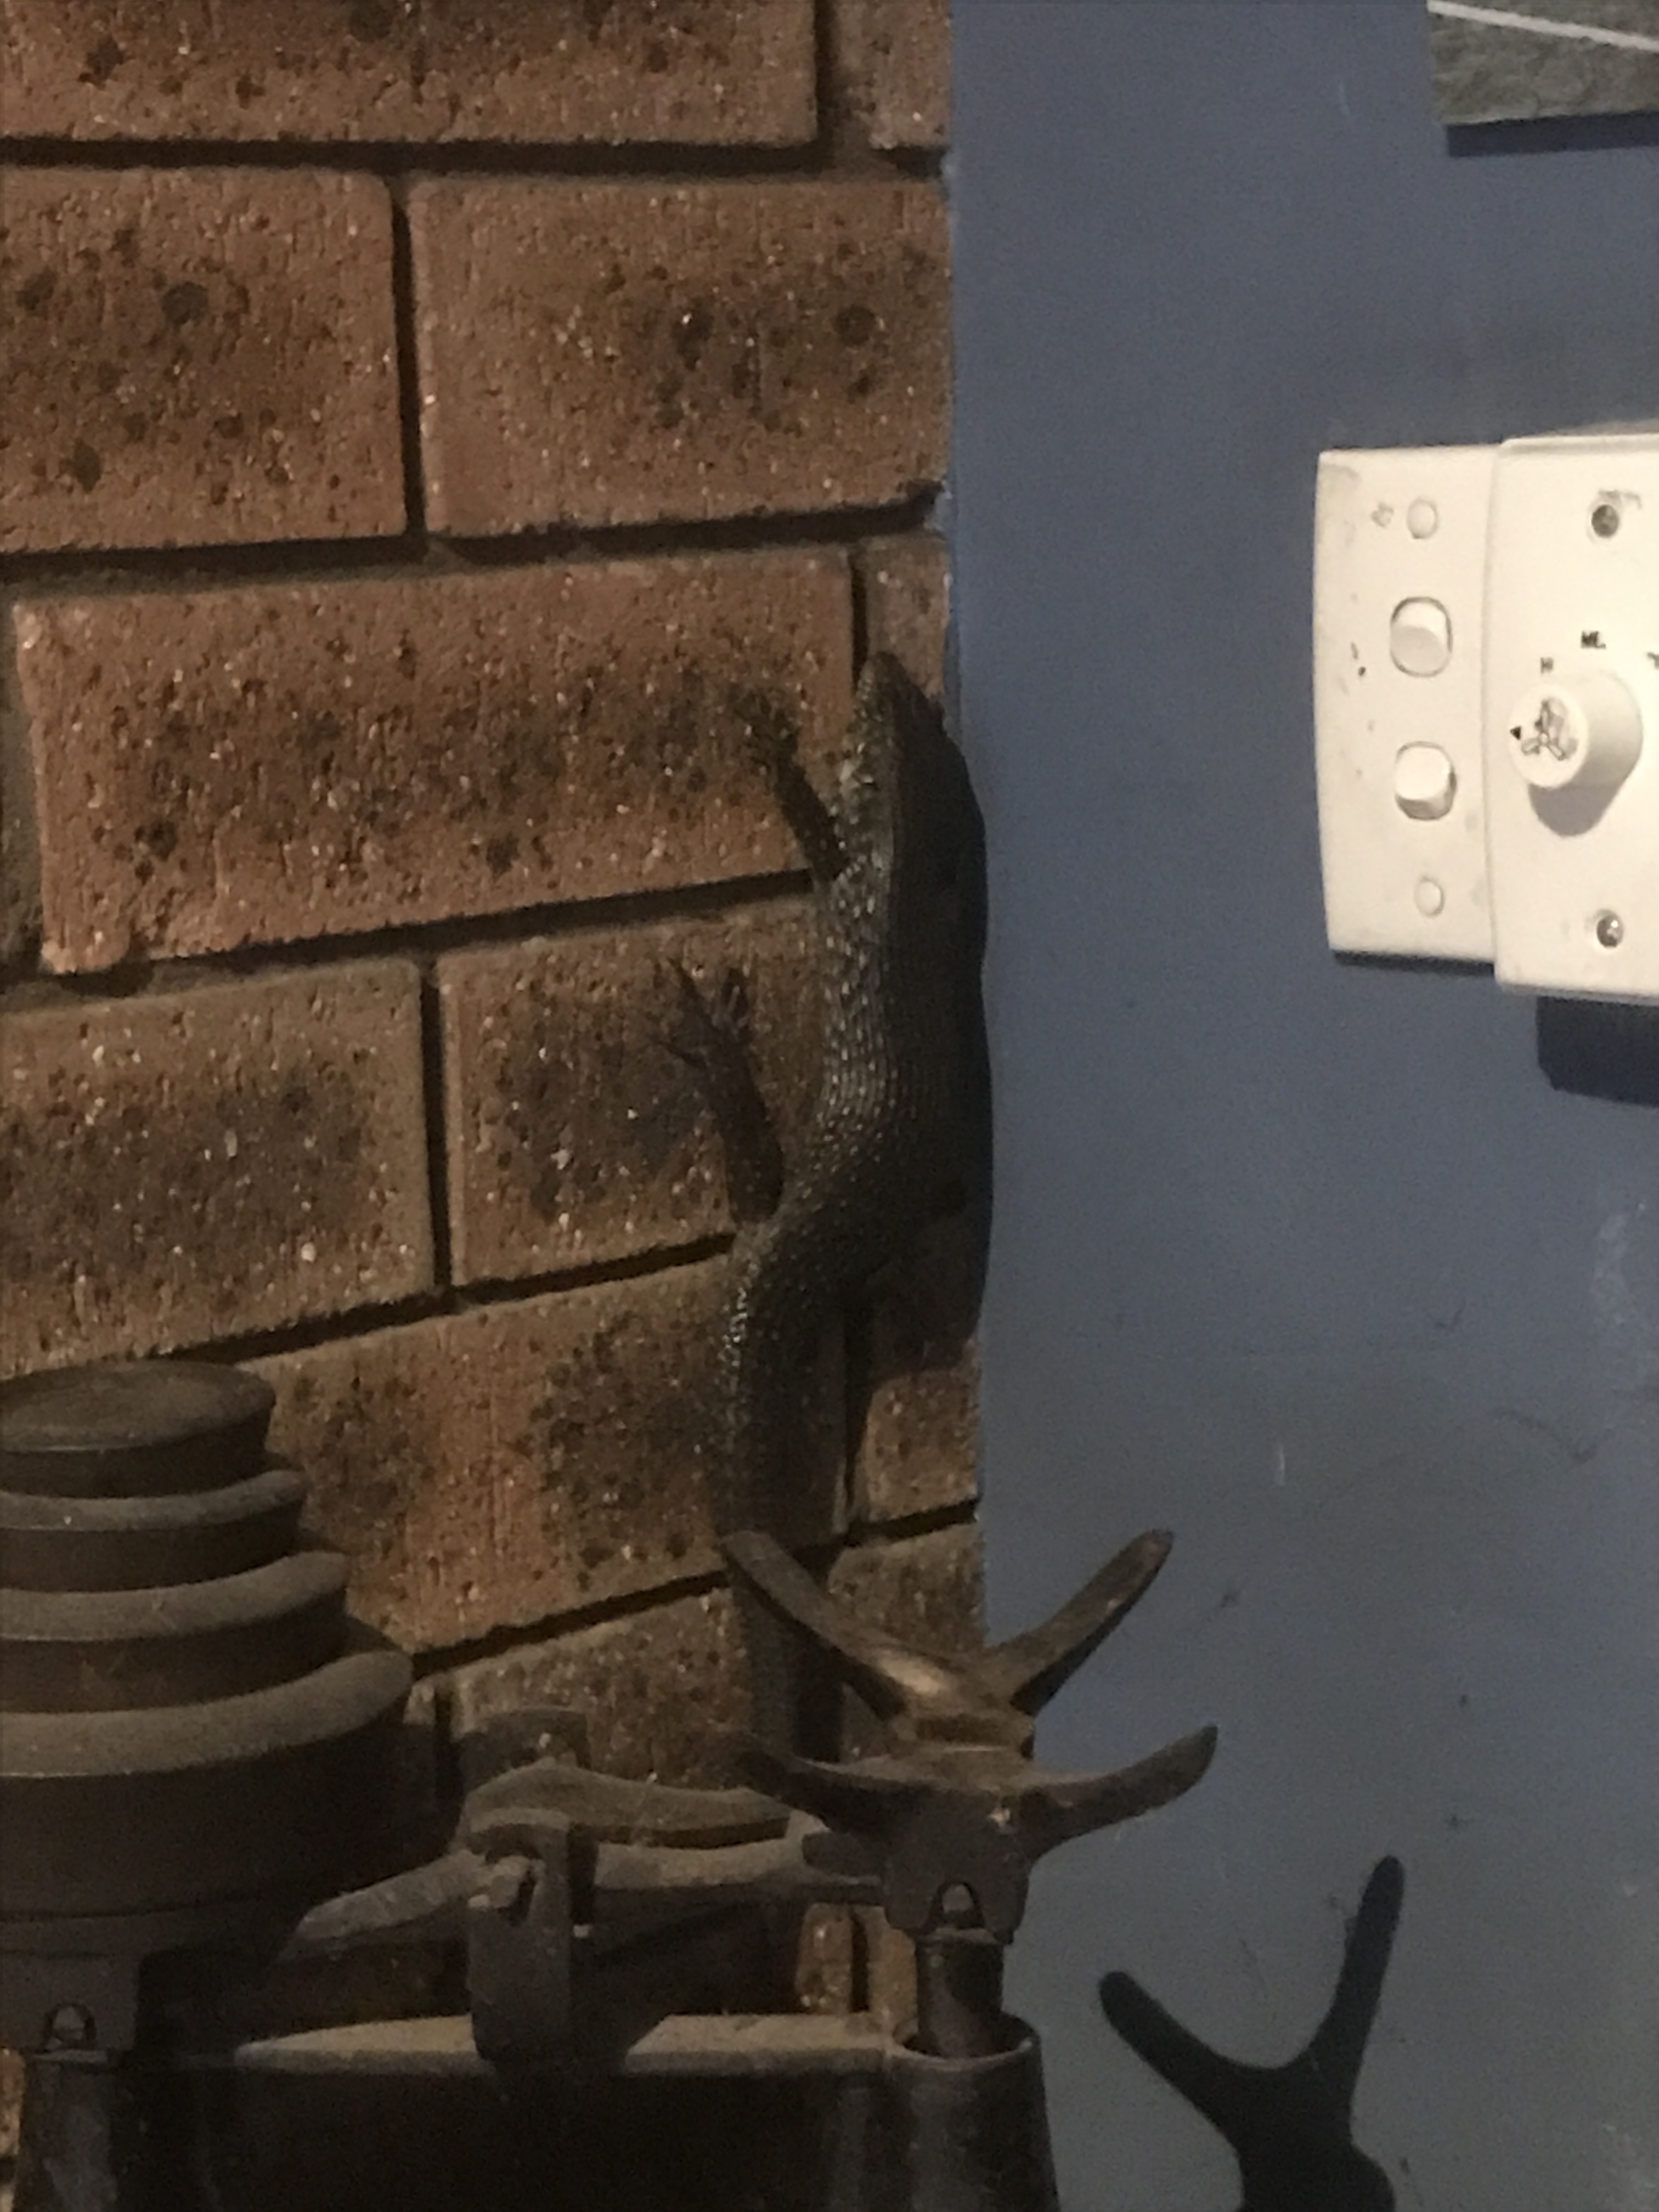 King skink on the wall near the kitchen light switch